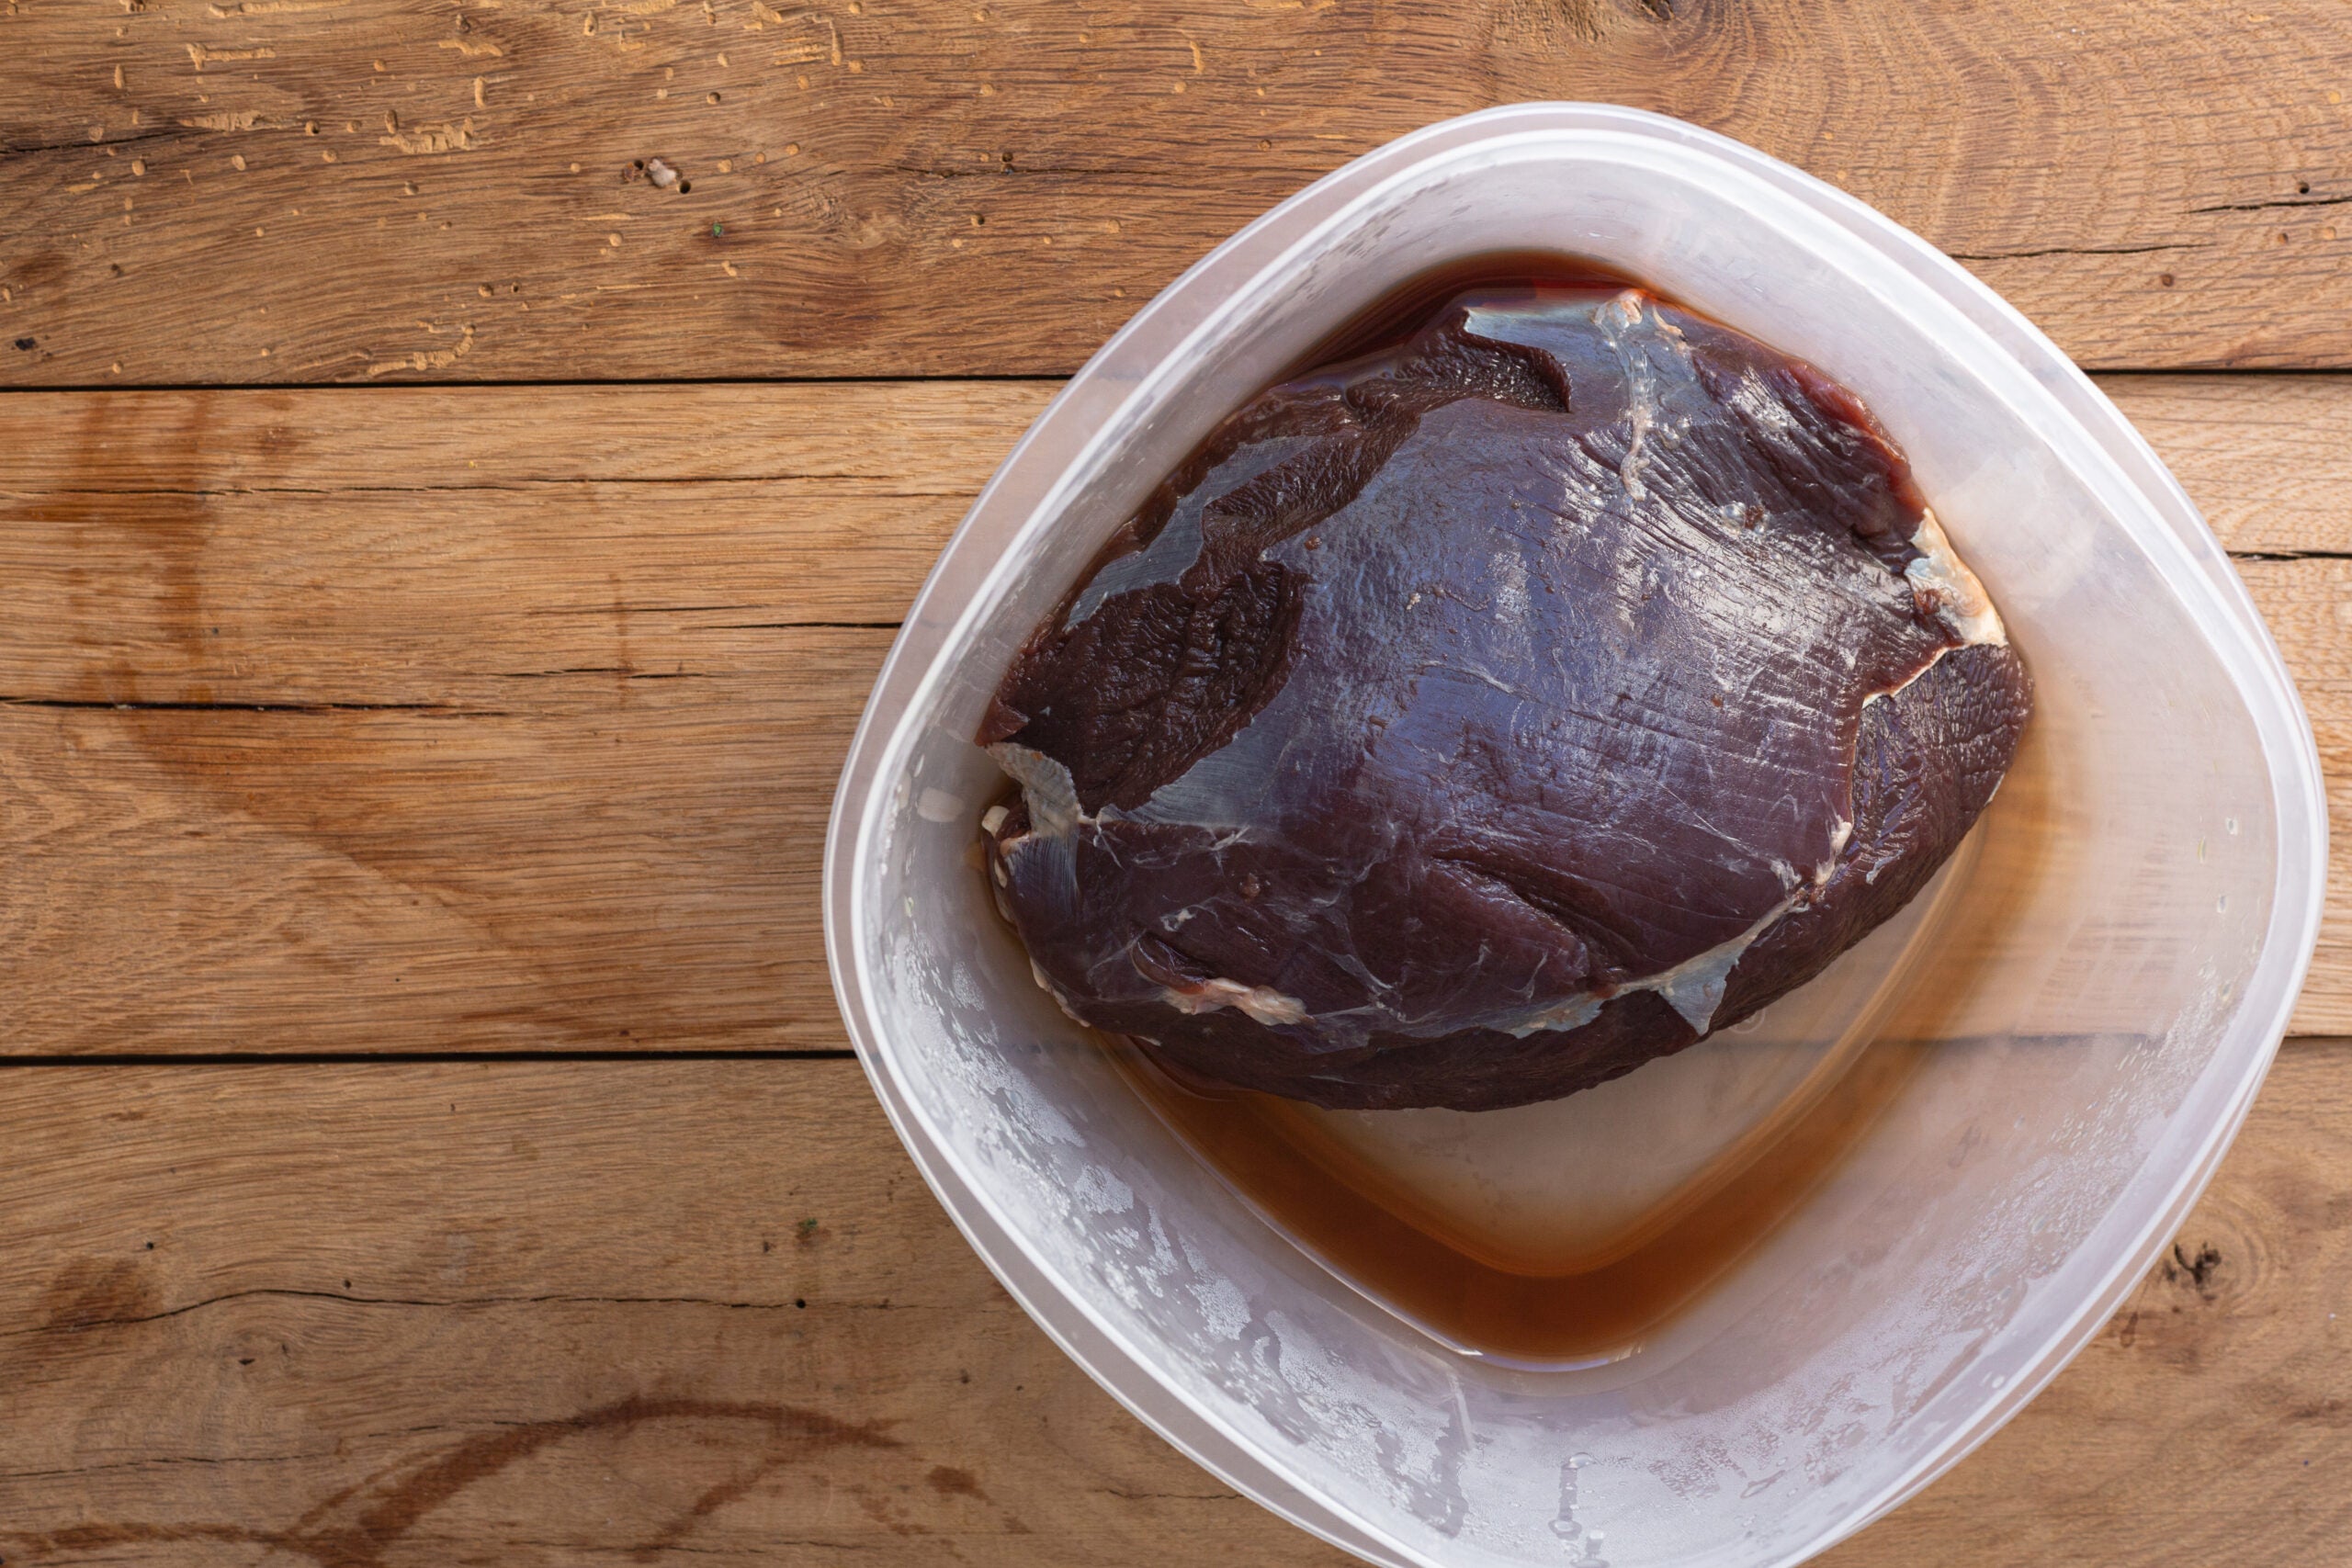 A venison roast sits in a plastic tub to cure.